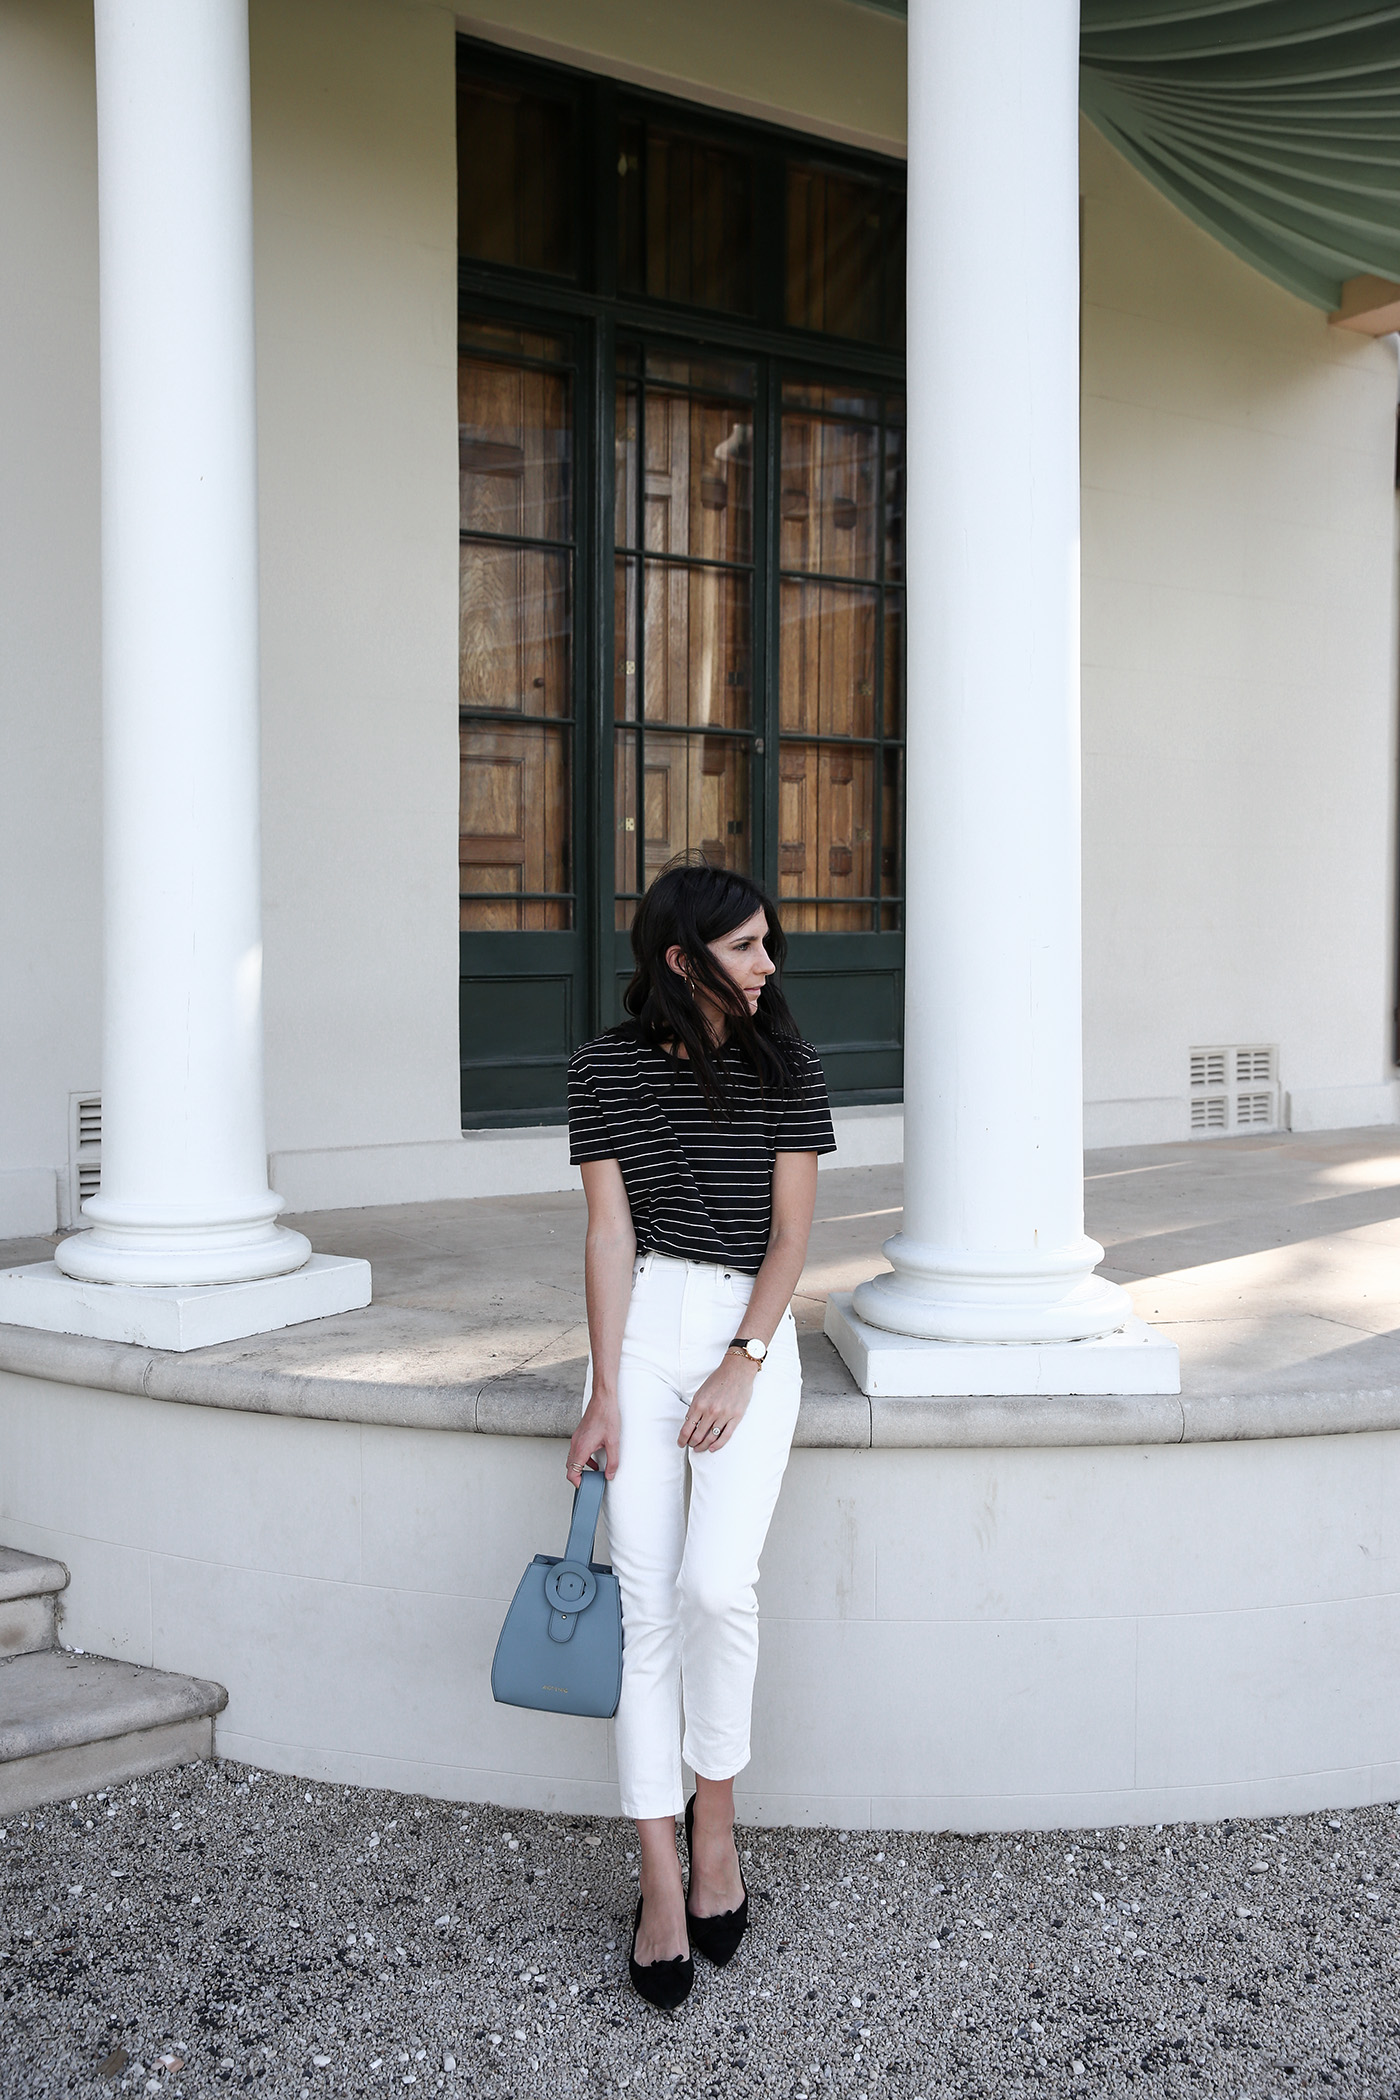 Sharing my top picks from Everlane